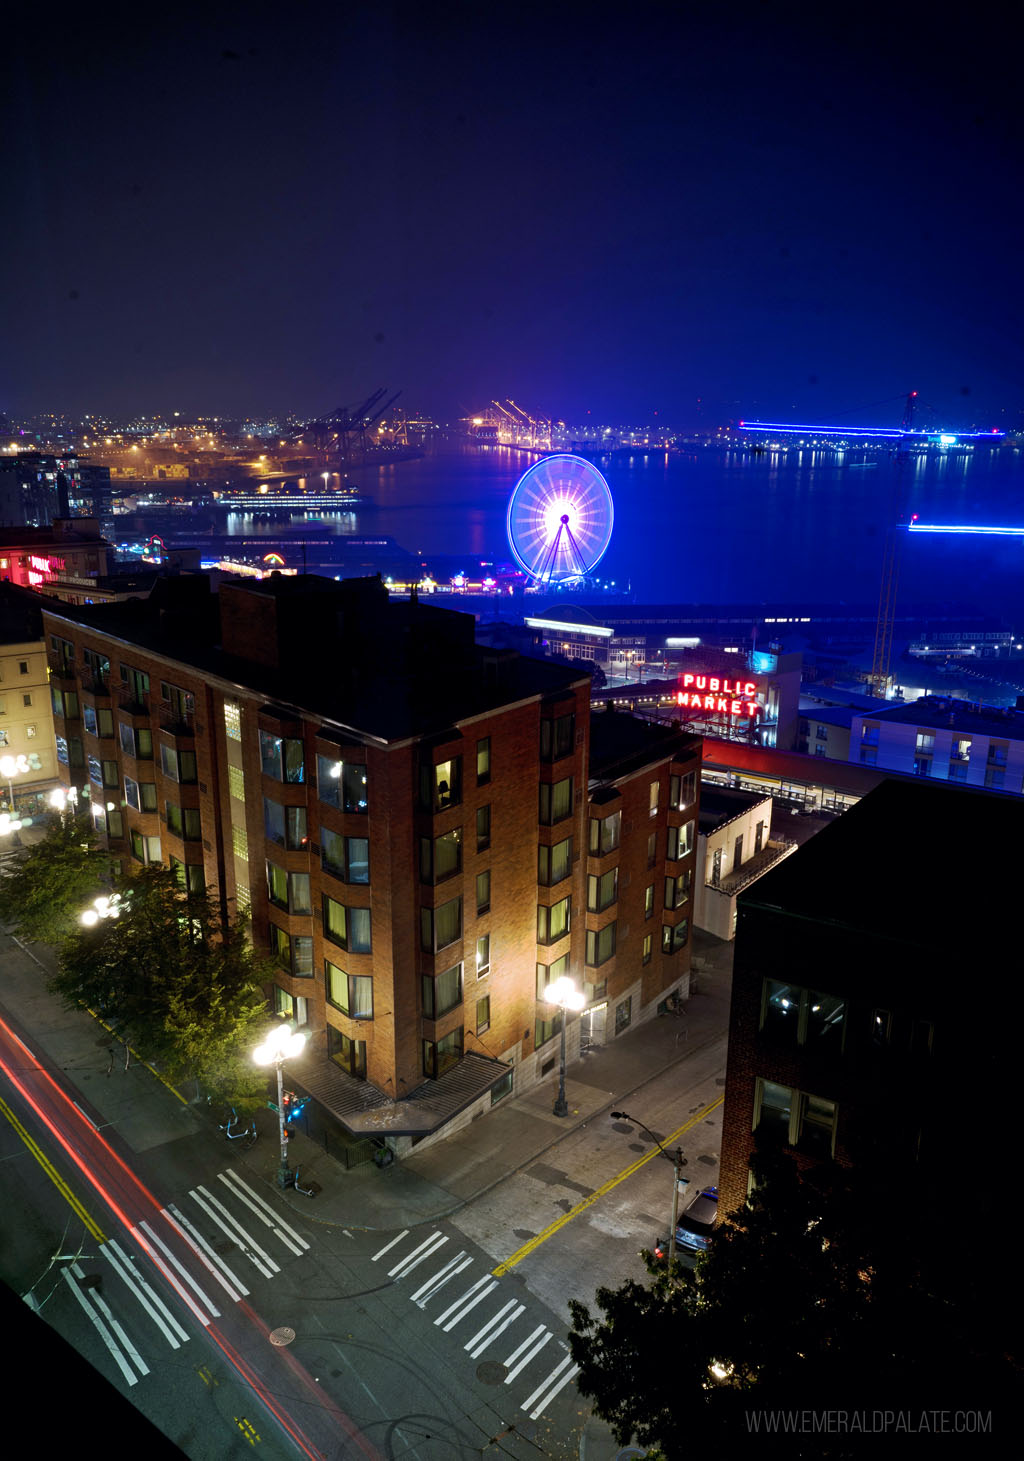 Seattle waterfront at night with the glowing lights of the Pike Place Market sign and Seattle Wheel